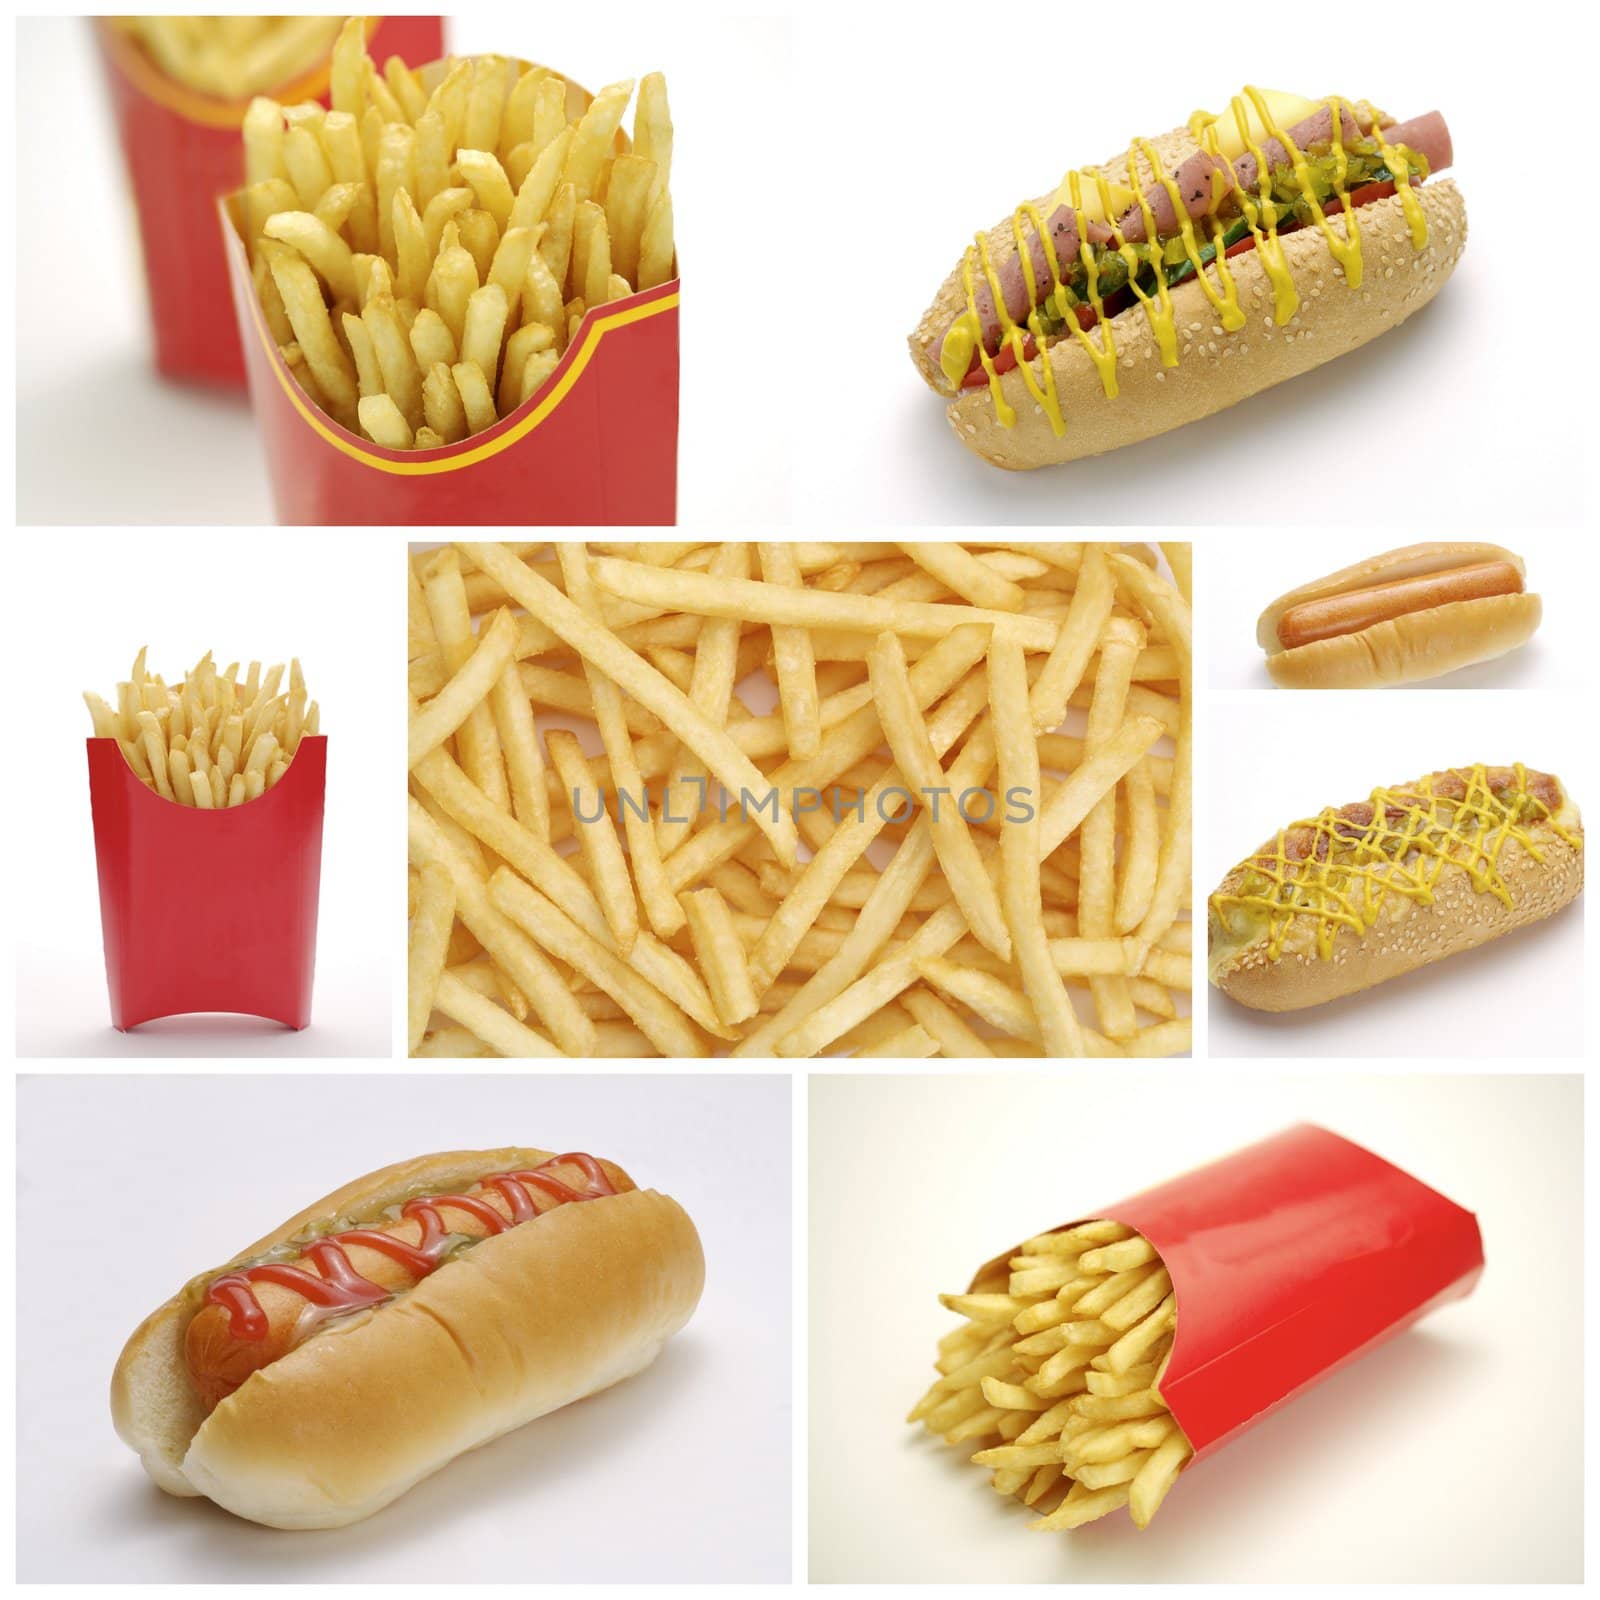 Hot dogs and Chips Collage by Baltus